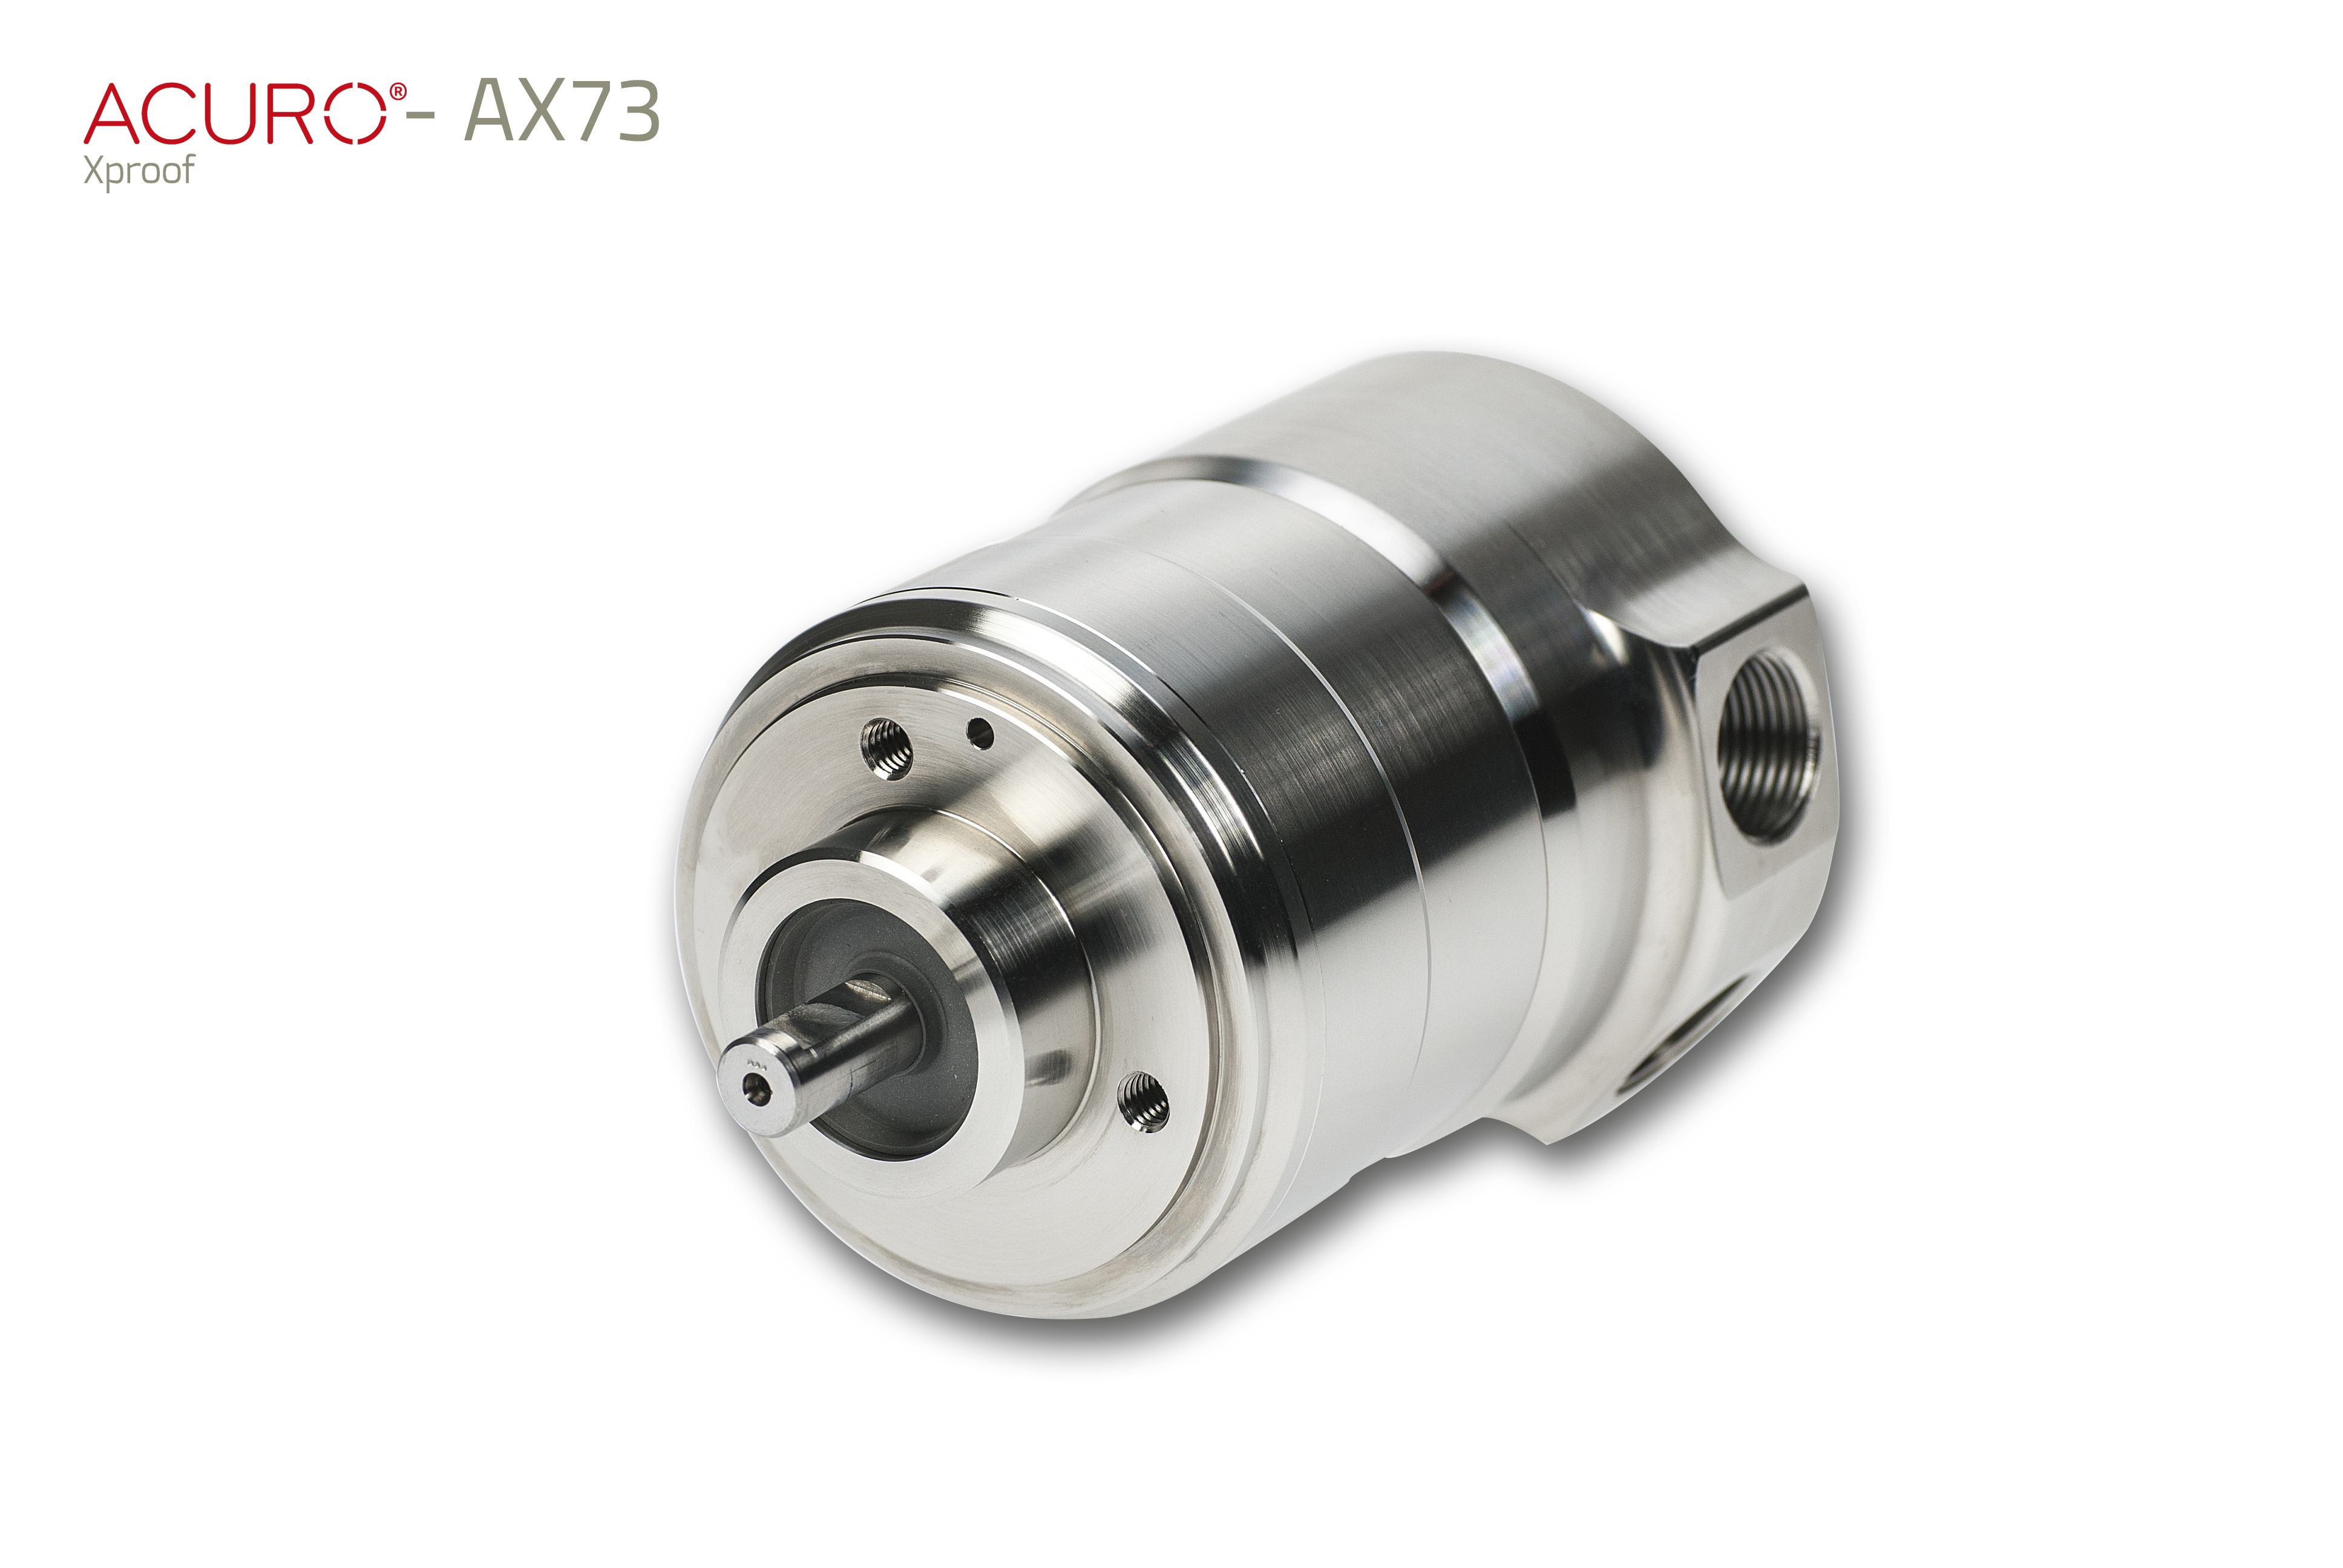 The new Hengstler ACURO® AX73 is ideal for ATEX-rated applications demanding precision or smooth speed regulation.